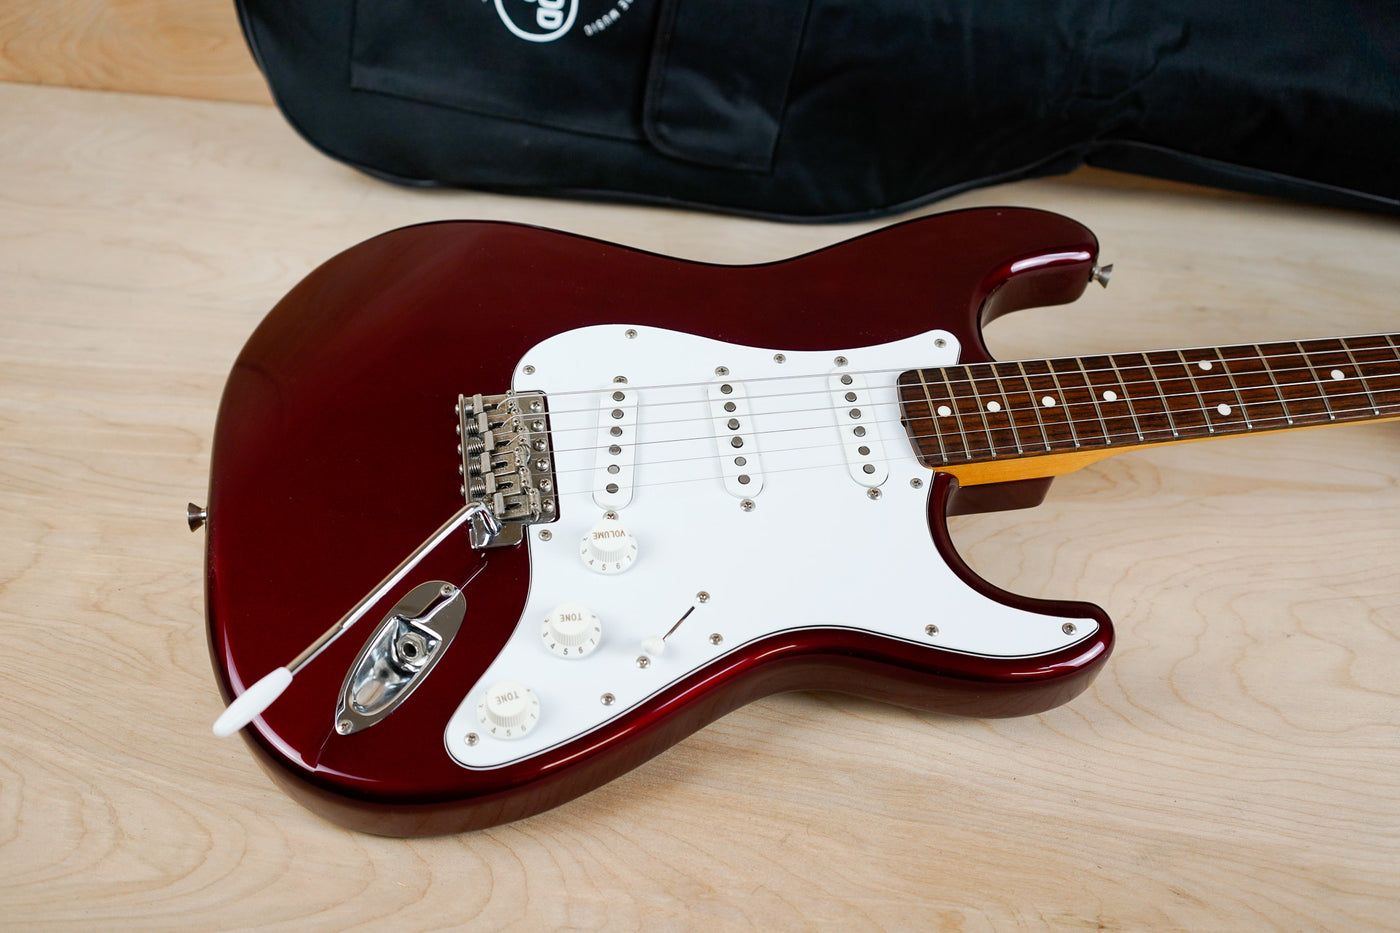 Fender ST-62 Stratocaster Reissue MIJ 2006 Old Candy Apple Red OCR Made in Japan w/ Bag